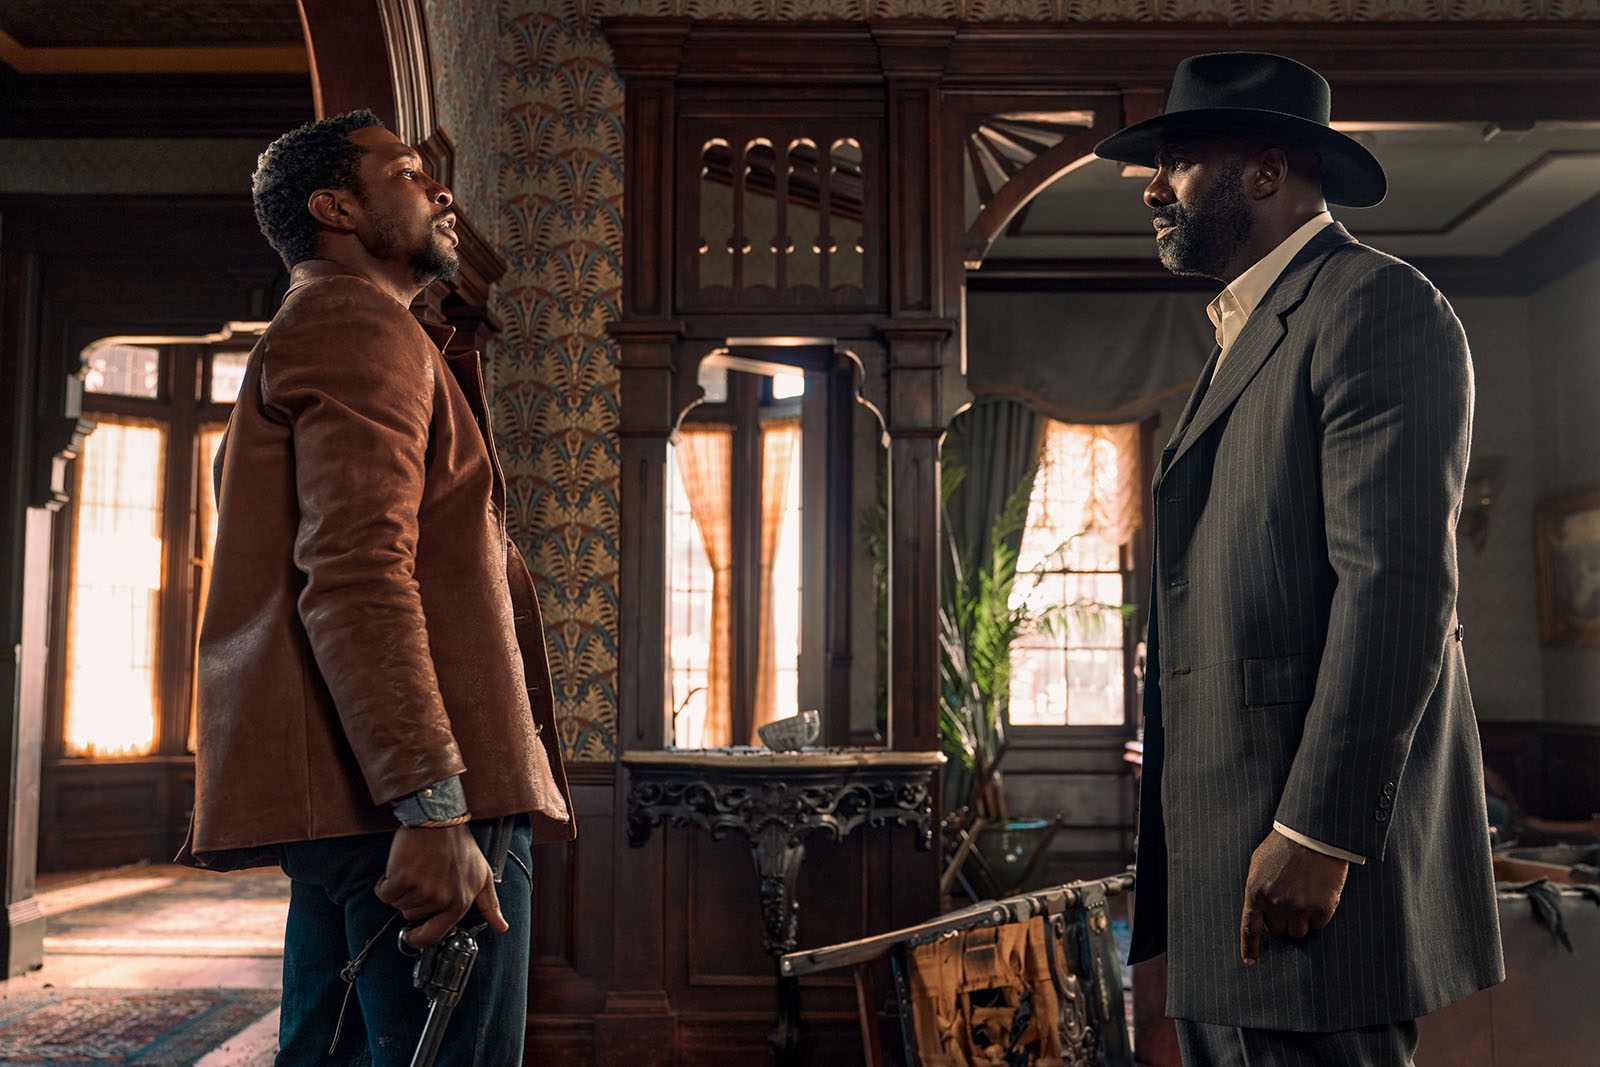 Tension is high as Nat Love (Jonathan Majors) confronts Rufus Buck (Idris Elba) in The Harder They Fall. Image © Netflix